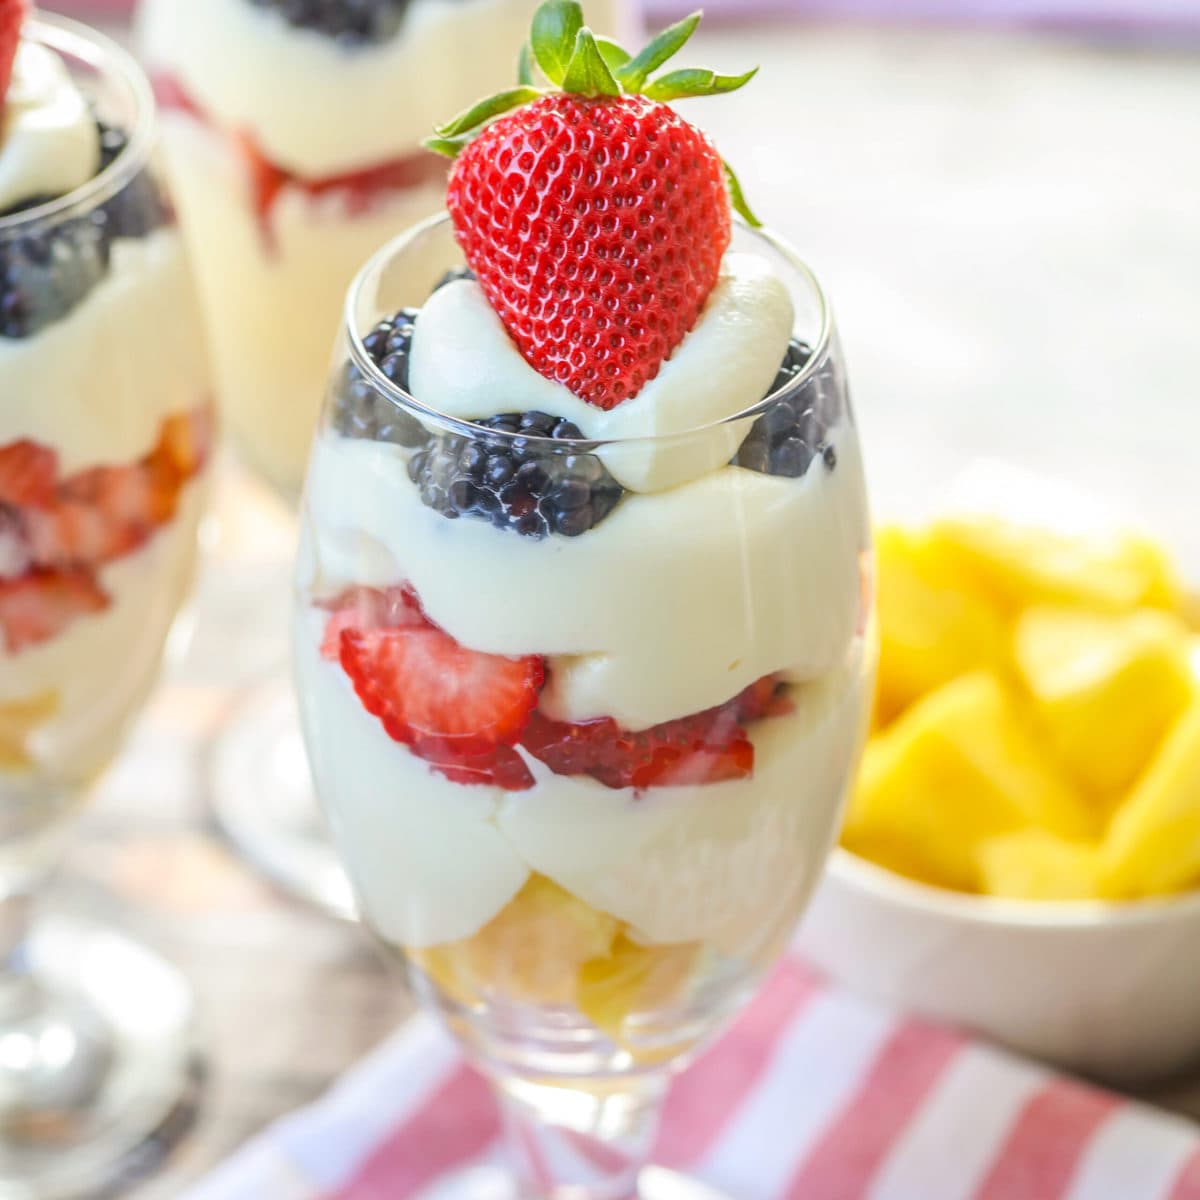 4th of July Desserts - Paradise parfaits in a glass parfait cup.